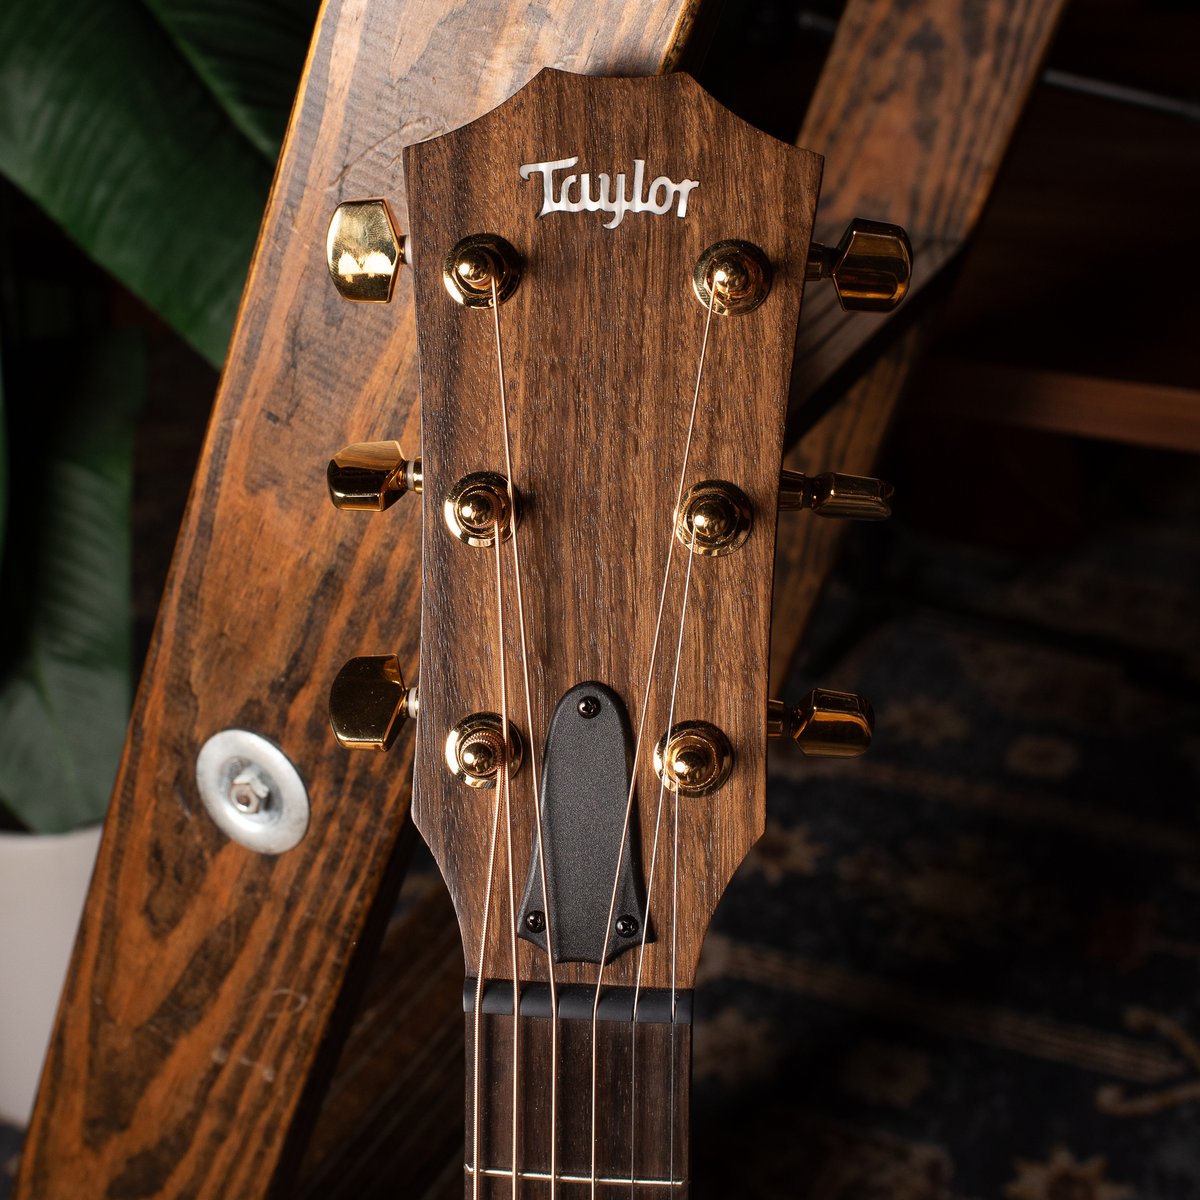 Find your @Taylorguitars at CME this #TaylorThursday! From brand-new 50th Anniversary models to fresh electric-acoustic T5z arrivals, we have the Taylor Guitar for you! Click, call, chat, or visit us this #TaylorThursday! bit.ly/3zkmbZr #CME #TaylorGuitars